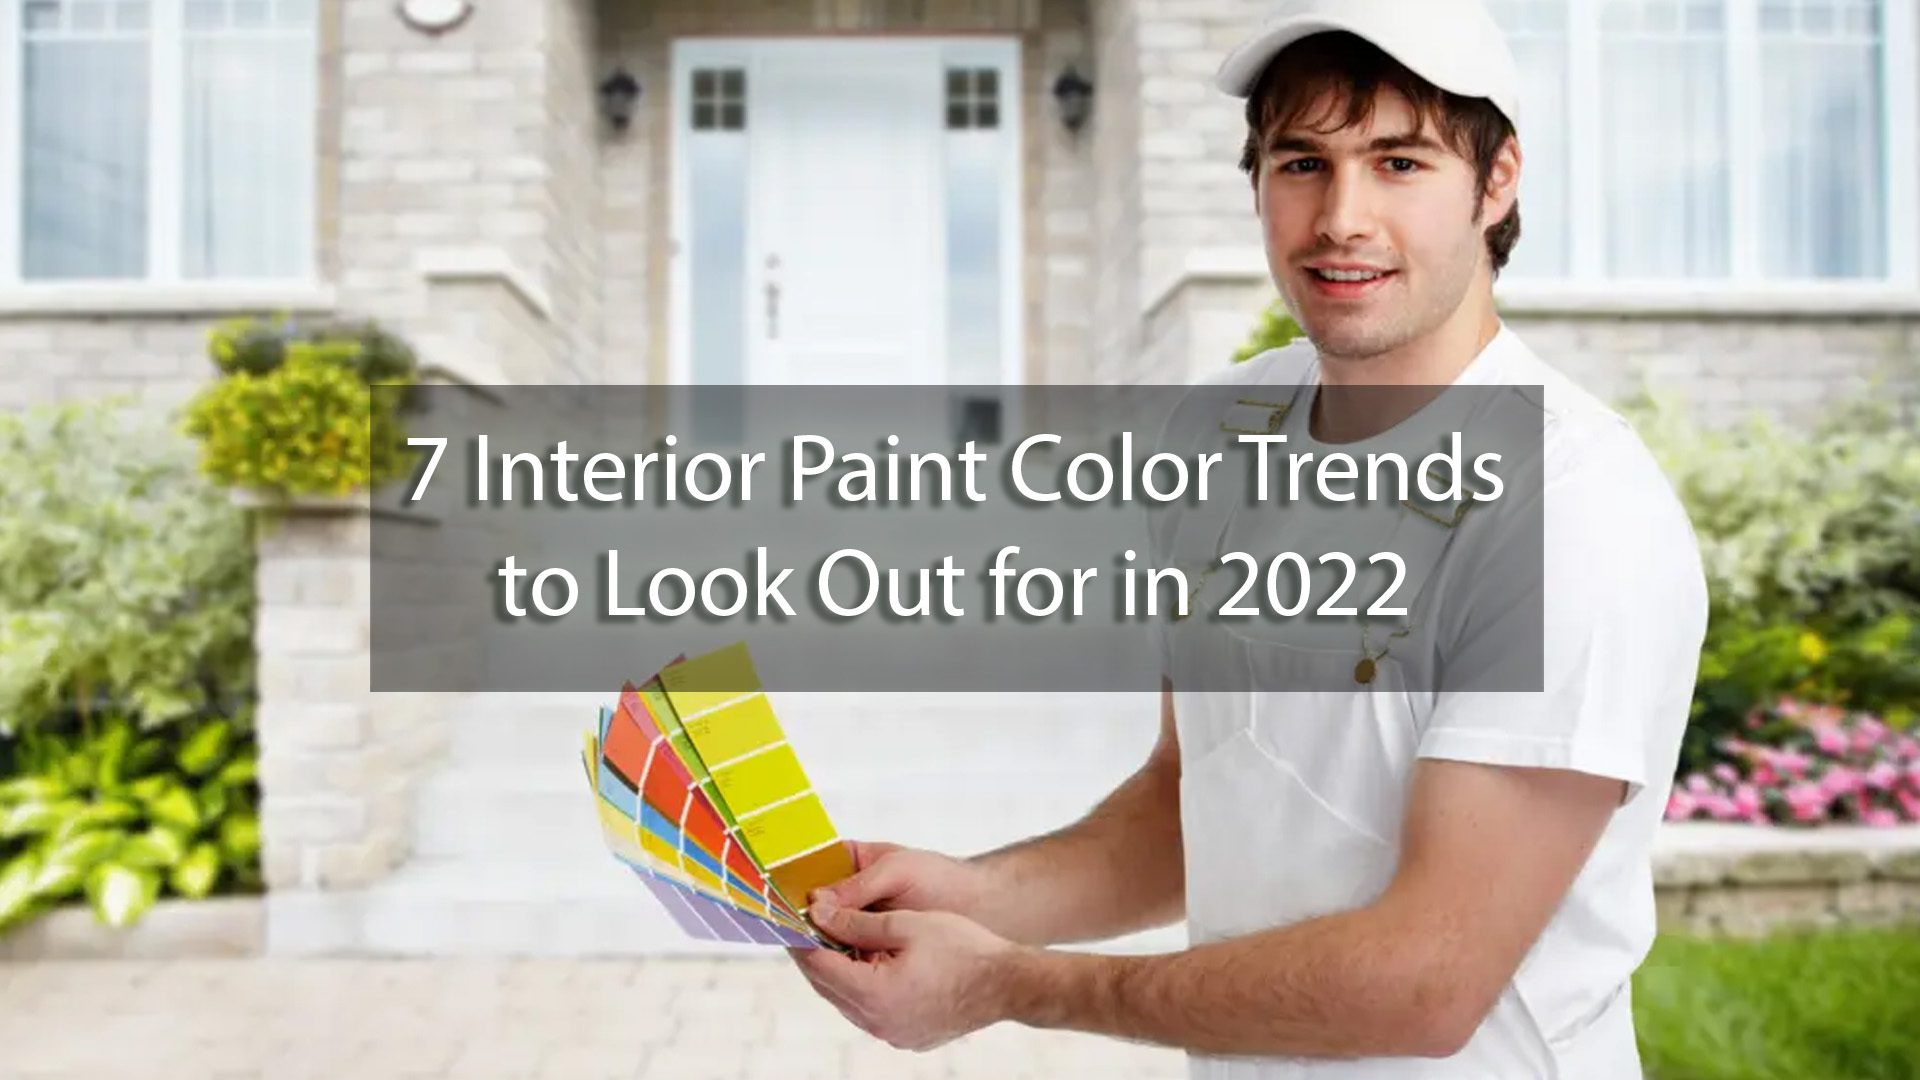 7 Interior Paint Color Trends to Look Out for in 2022